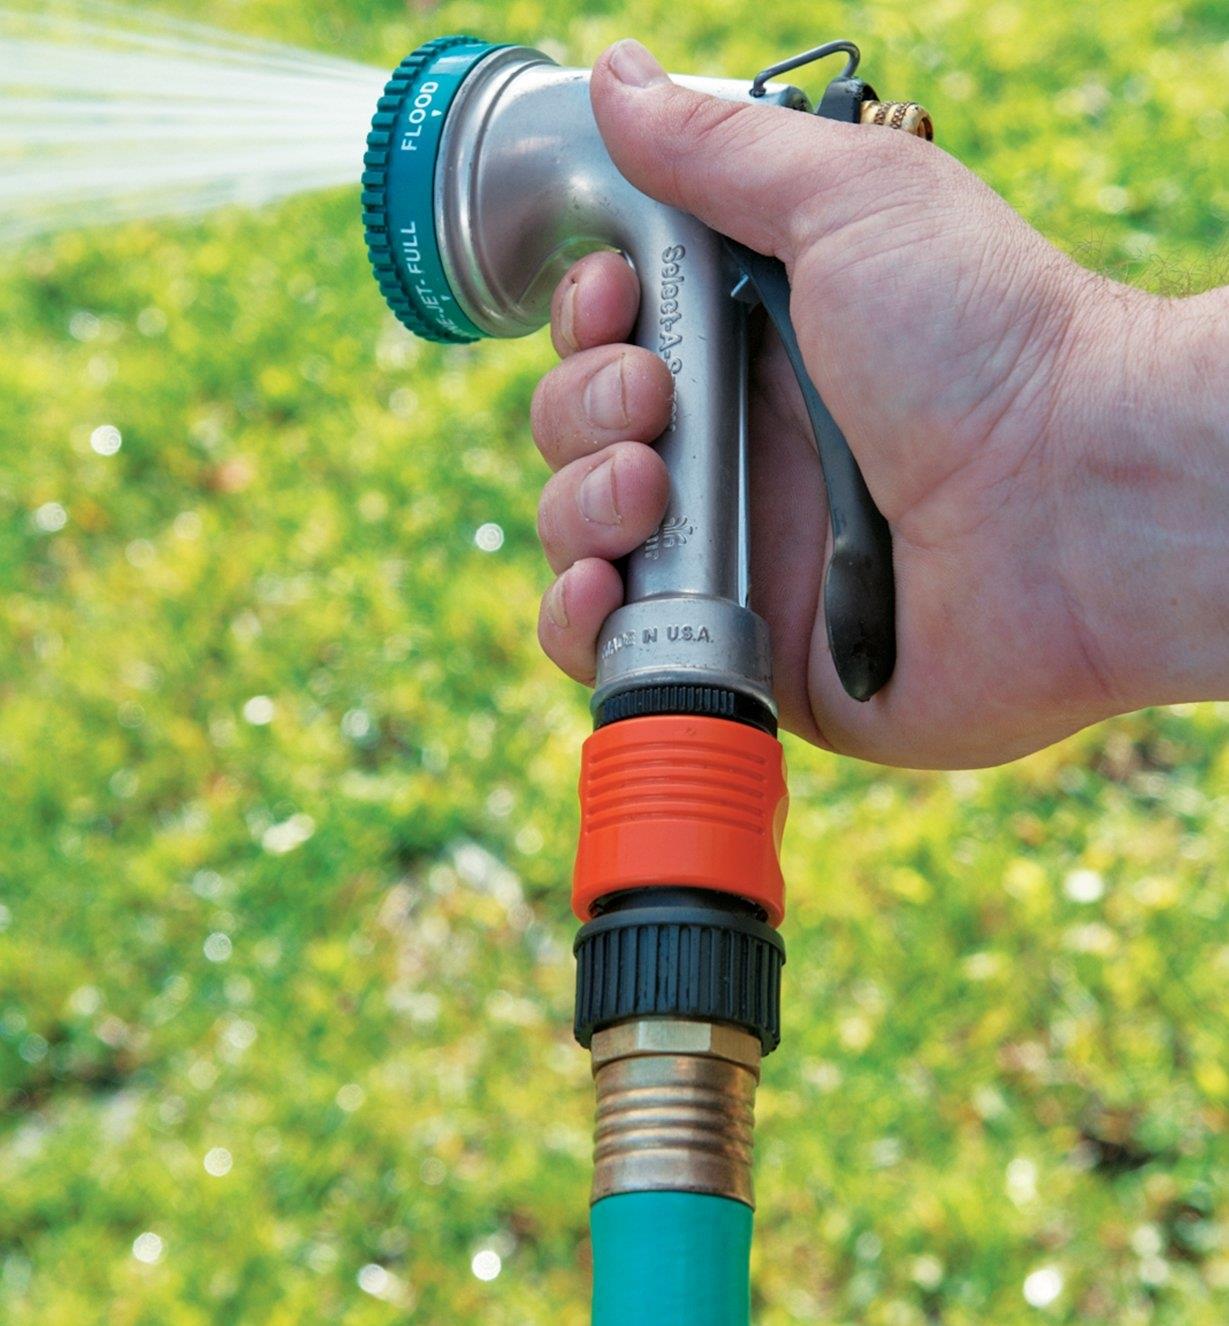 Male and female quick-connects attaching a hose to a sprayer